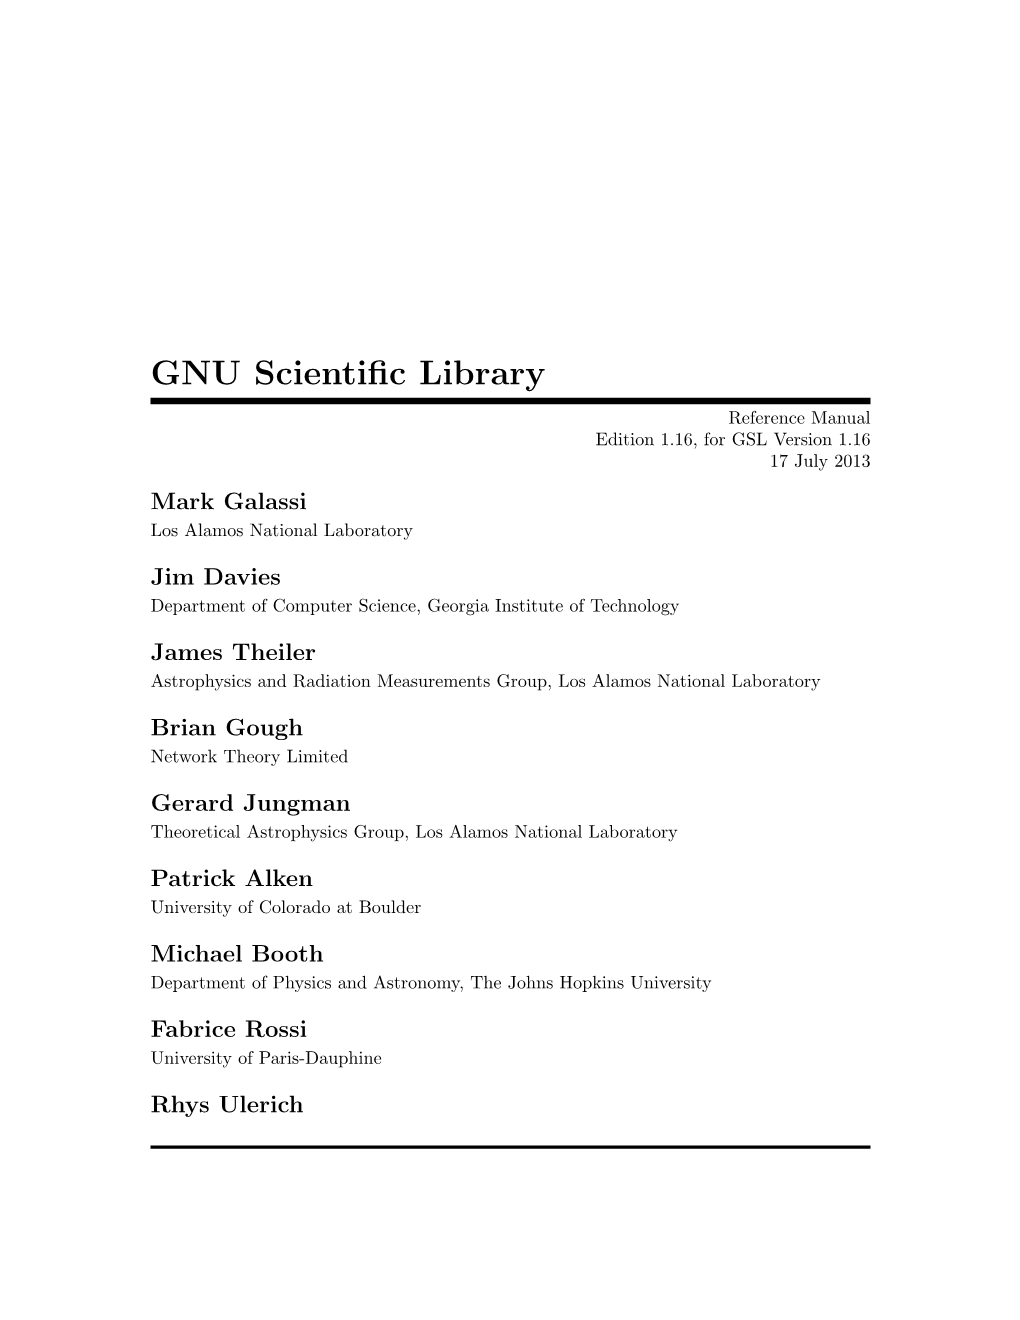 GNU Scientific Library Reference Manual Edition 1.16, for GSL Version 1.16 17 July 2013 Mark Galassi Los Alamos National Laboratory